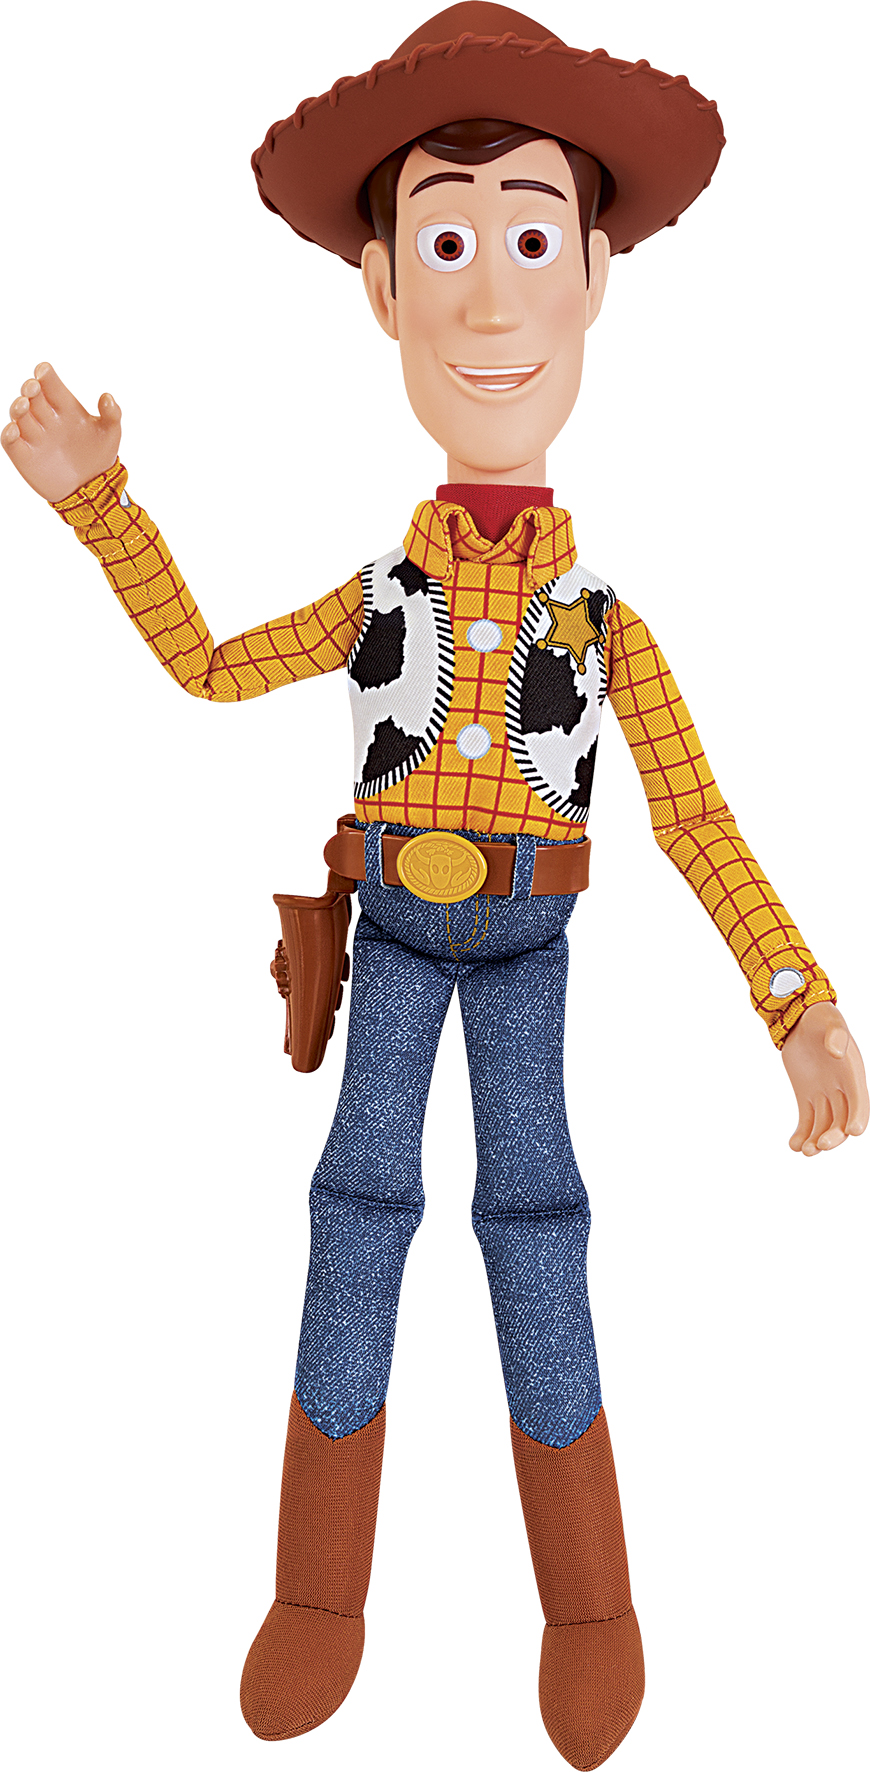 LANSAY Figurine parlante Toy Story 4 - Woody pas cher 